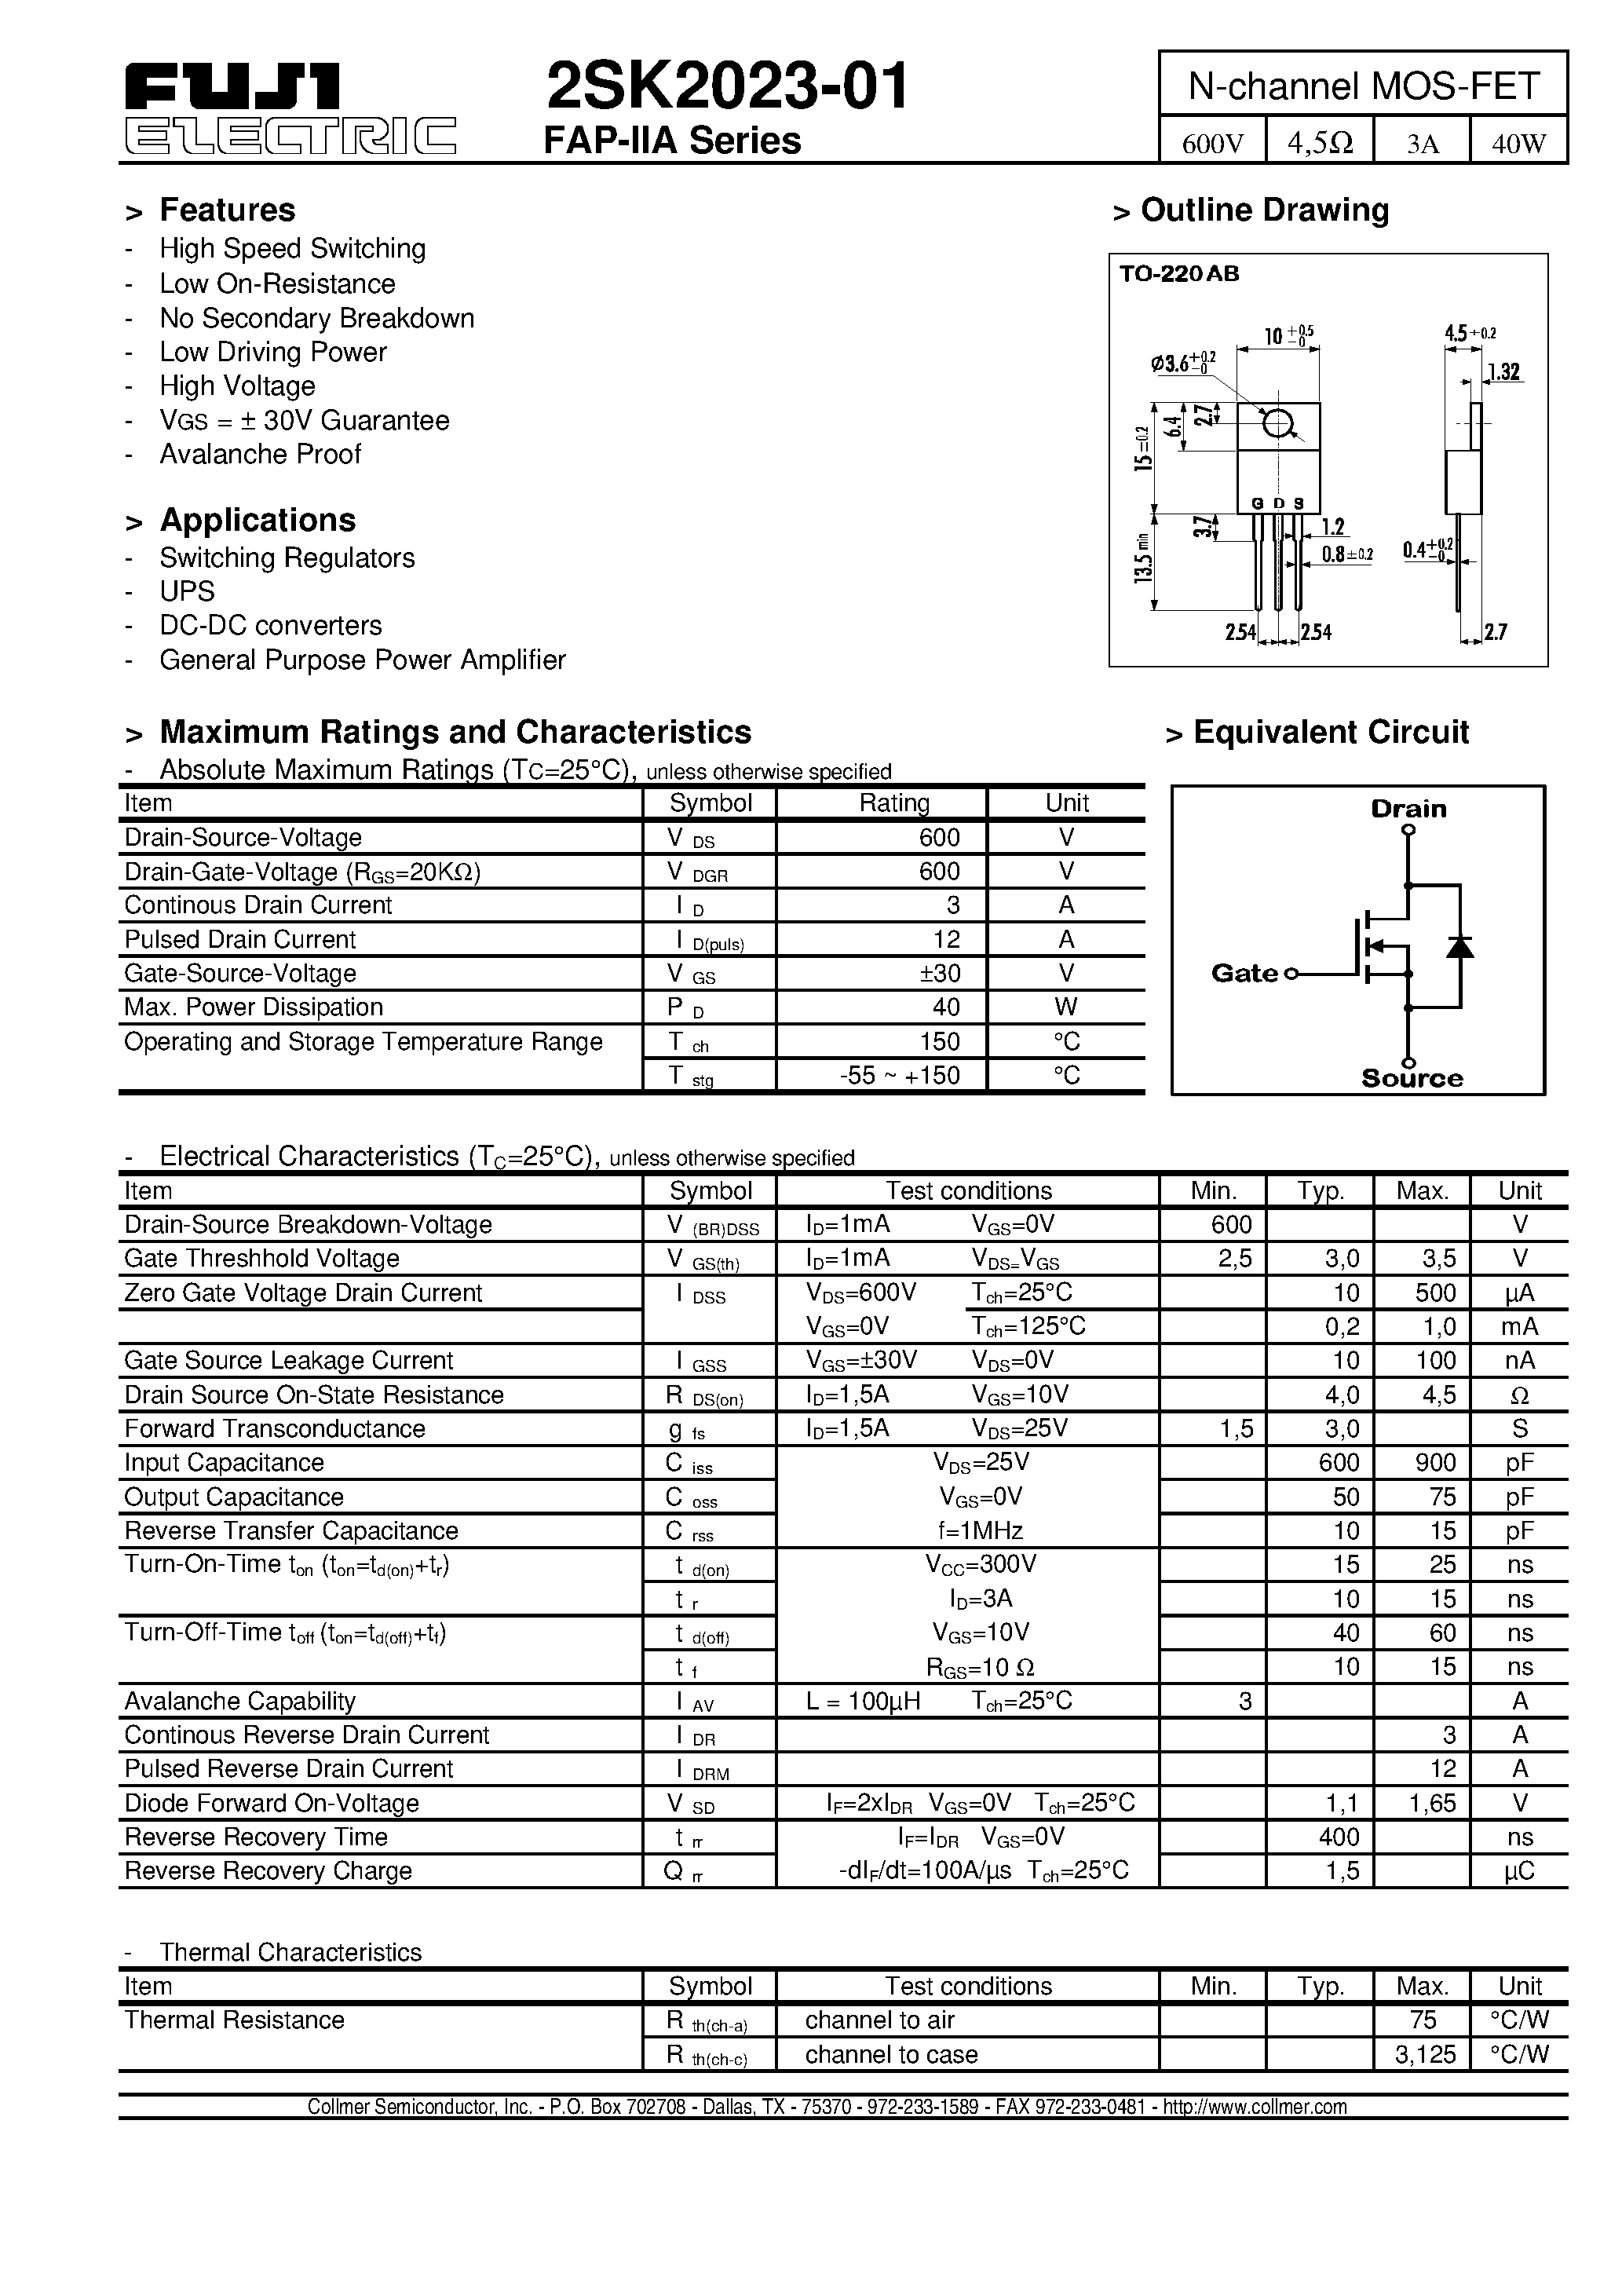 Datasheet 2SK2023-01 - N-channel MOS-FET page 1